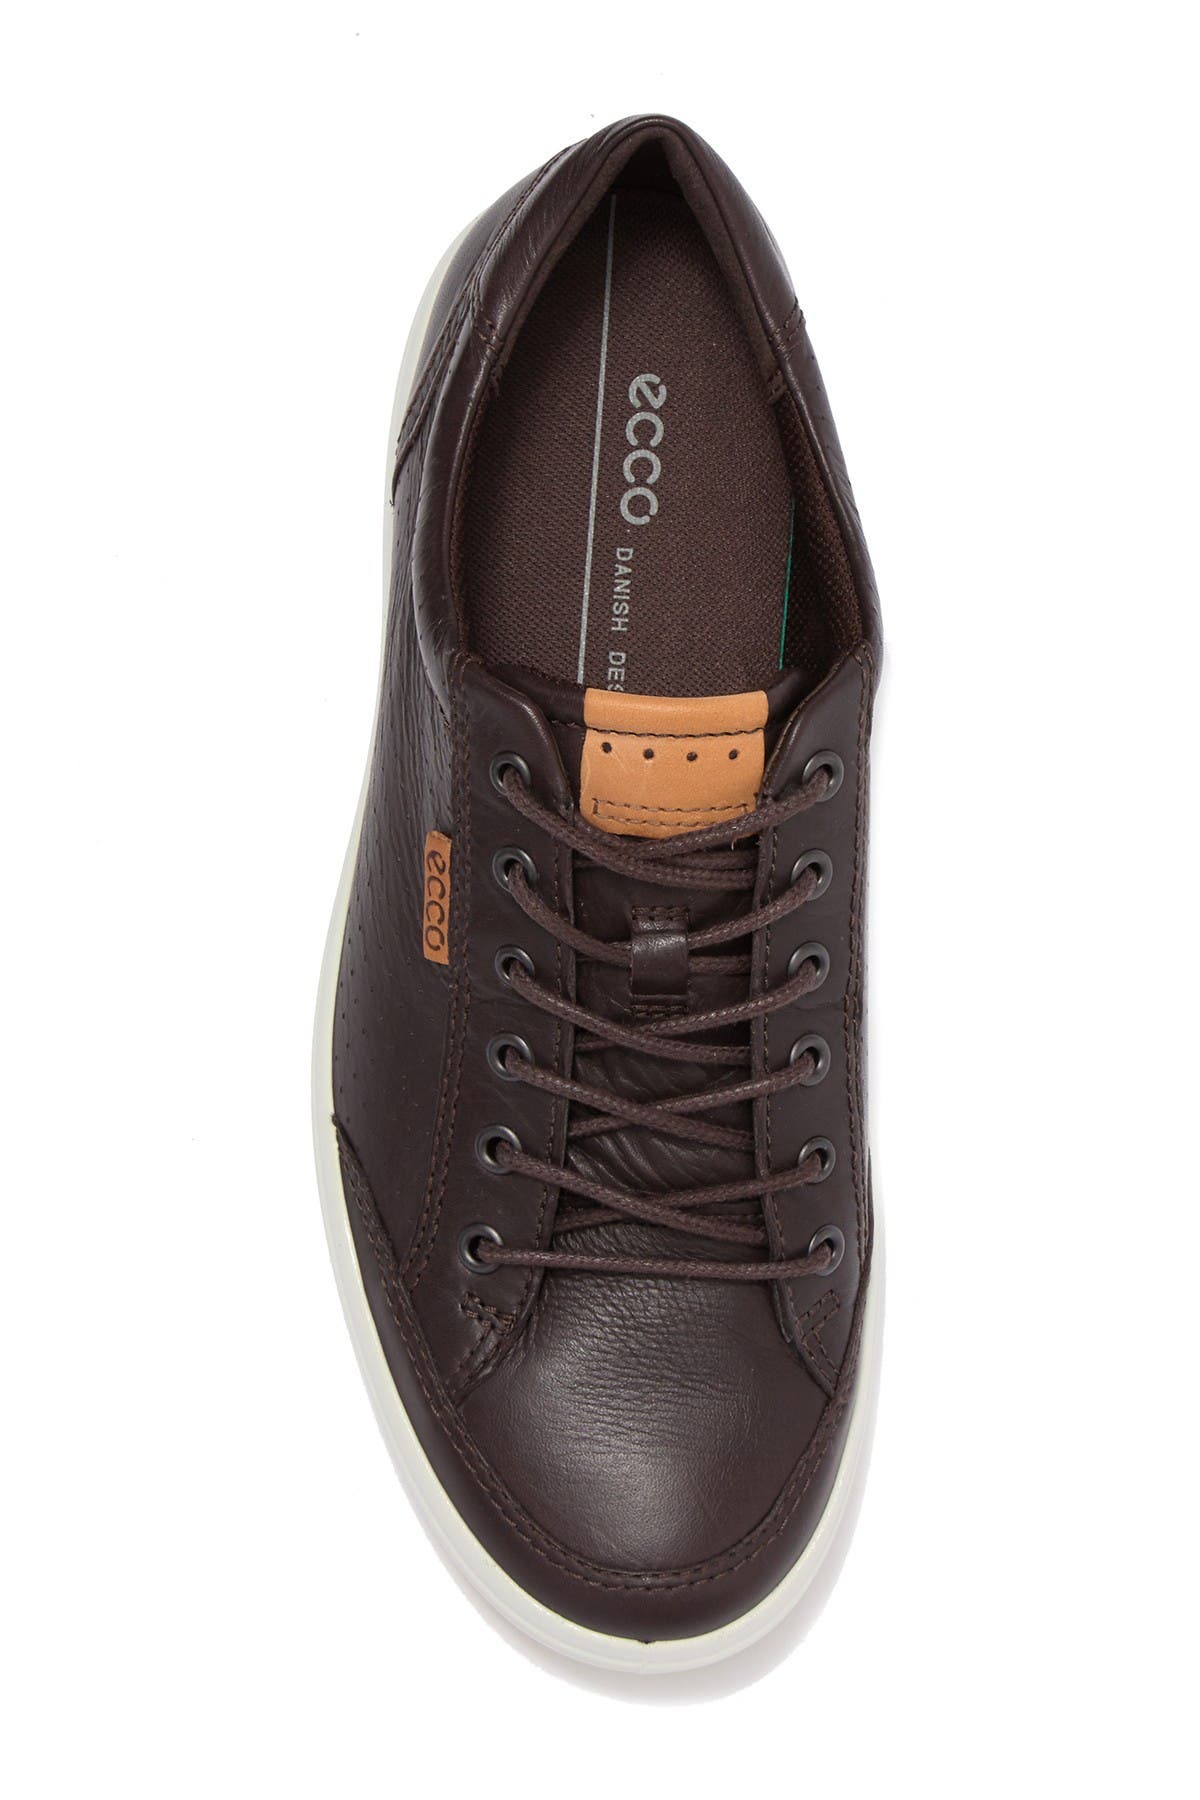 ECCO | Soft 7 Light Perforated Leather 